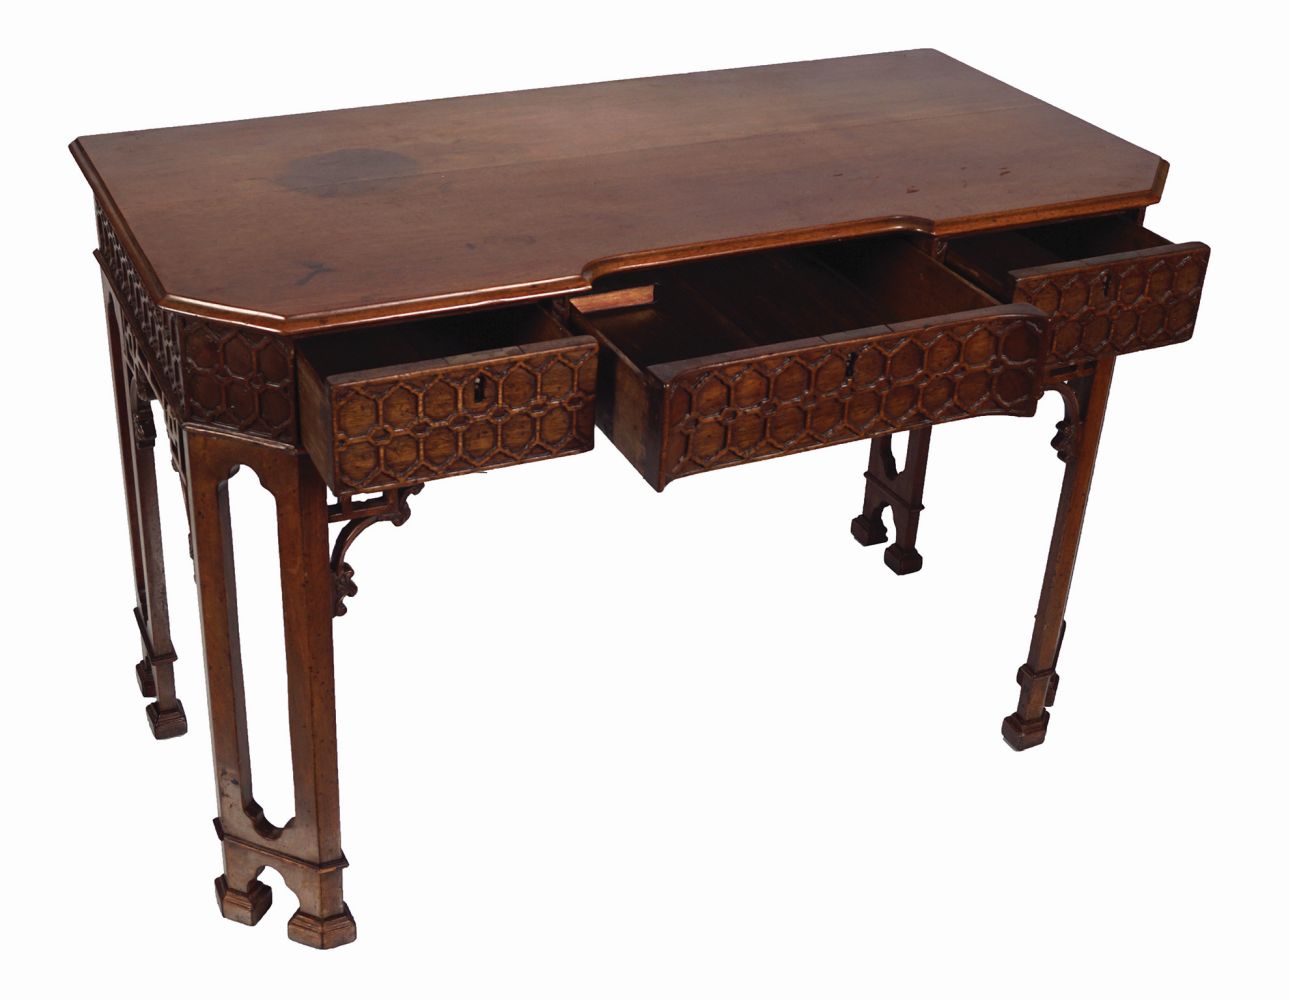 18TH-CENTURY PERIOD CHINESE CHIPPENDALE TABLE - Image 4 of 7